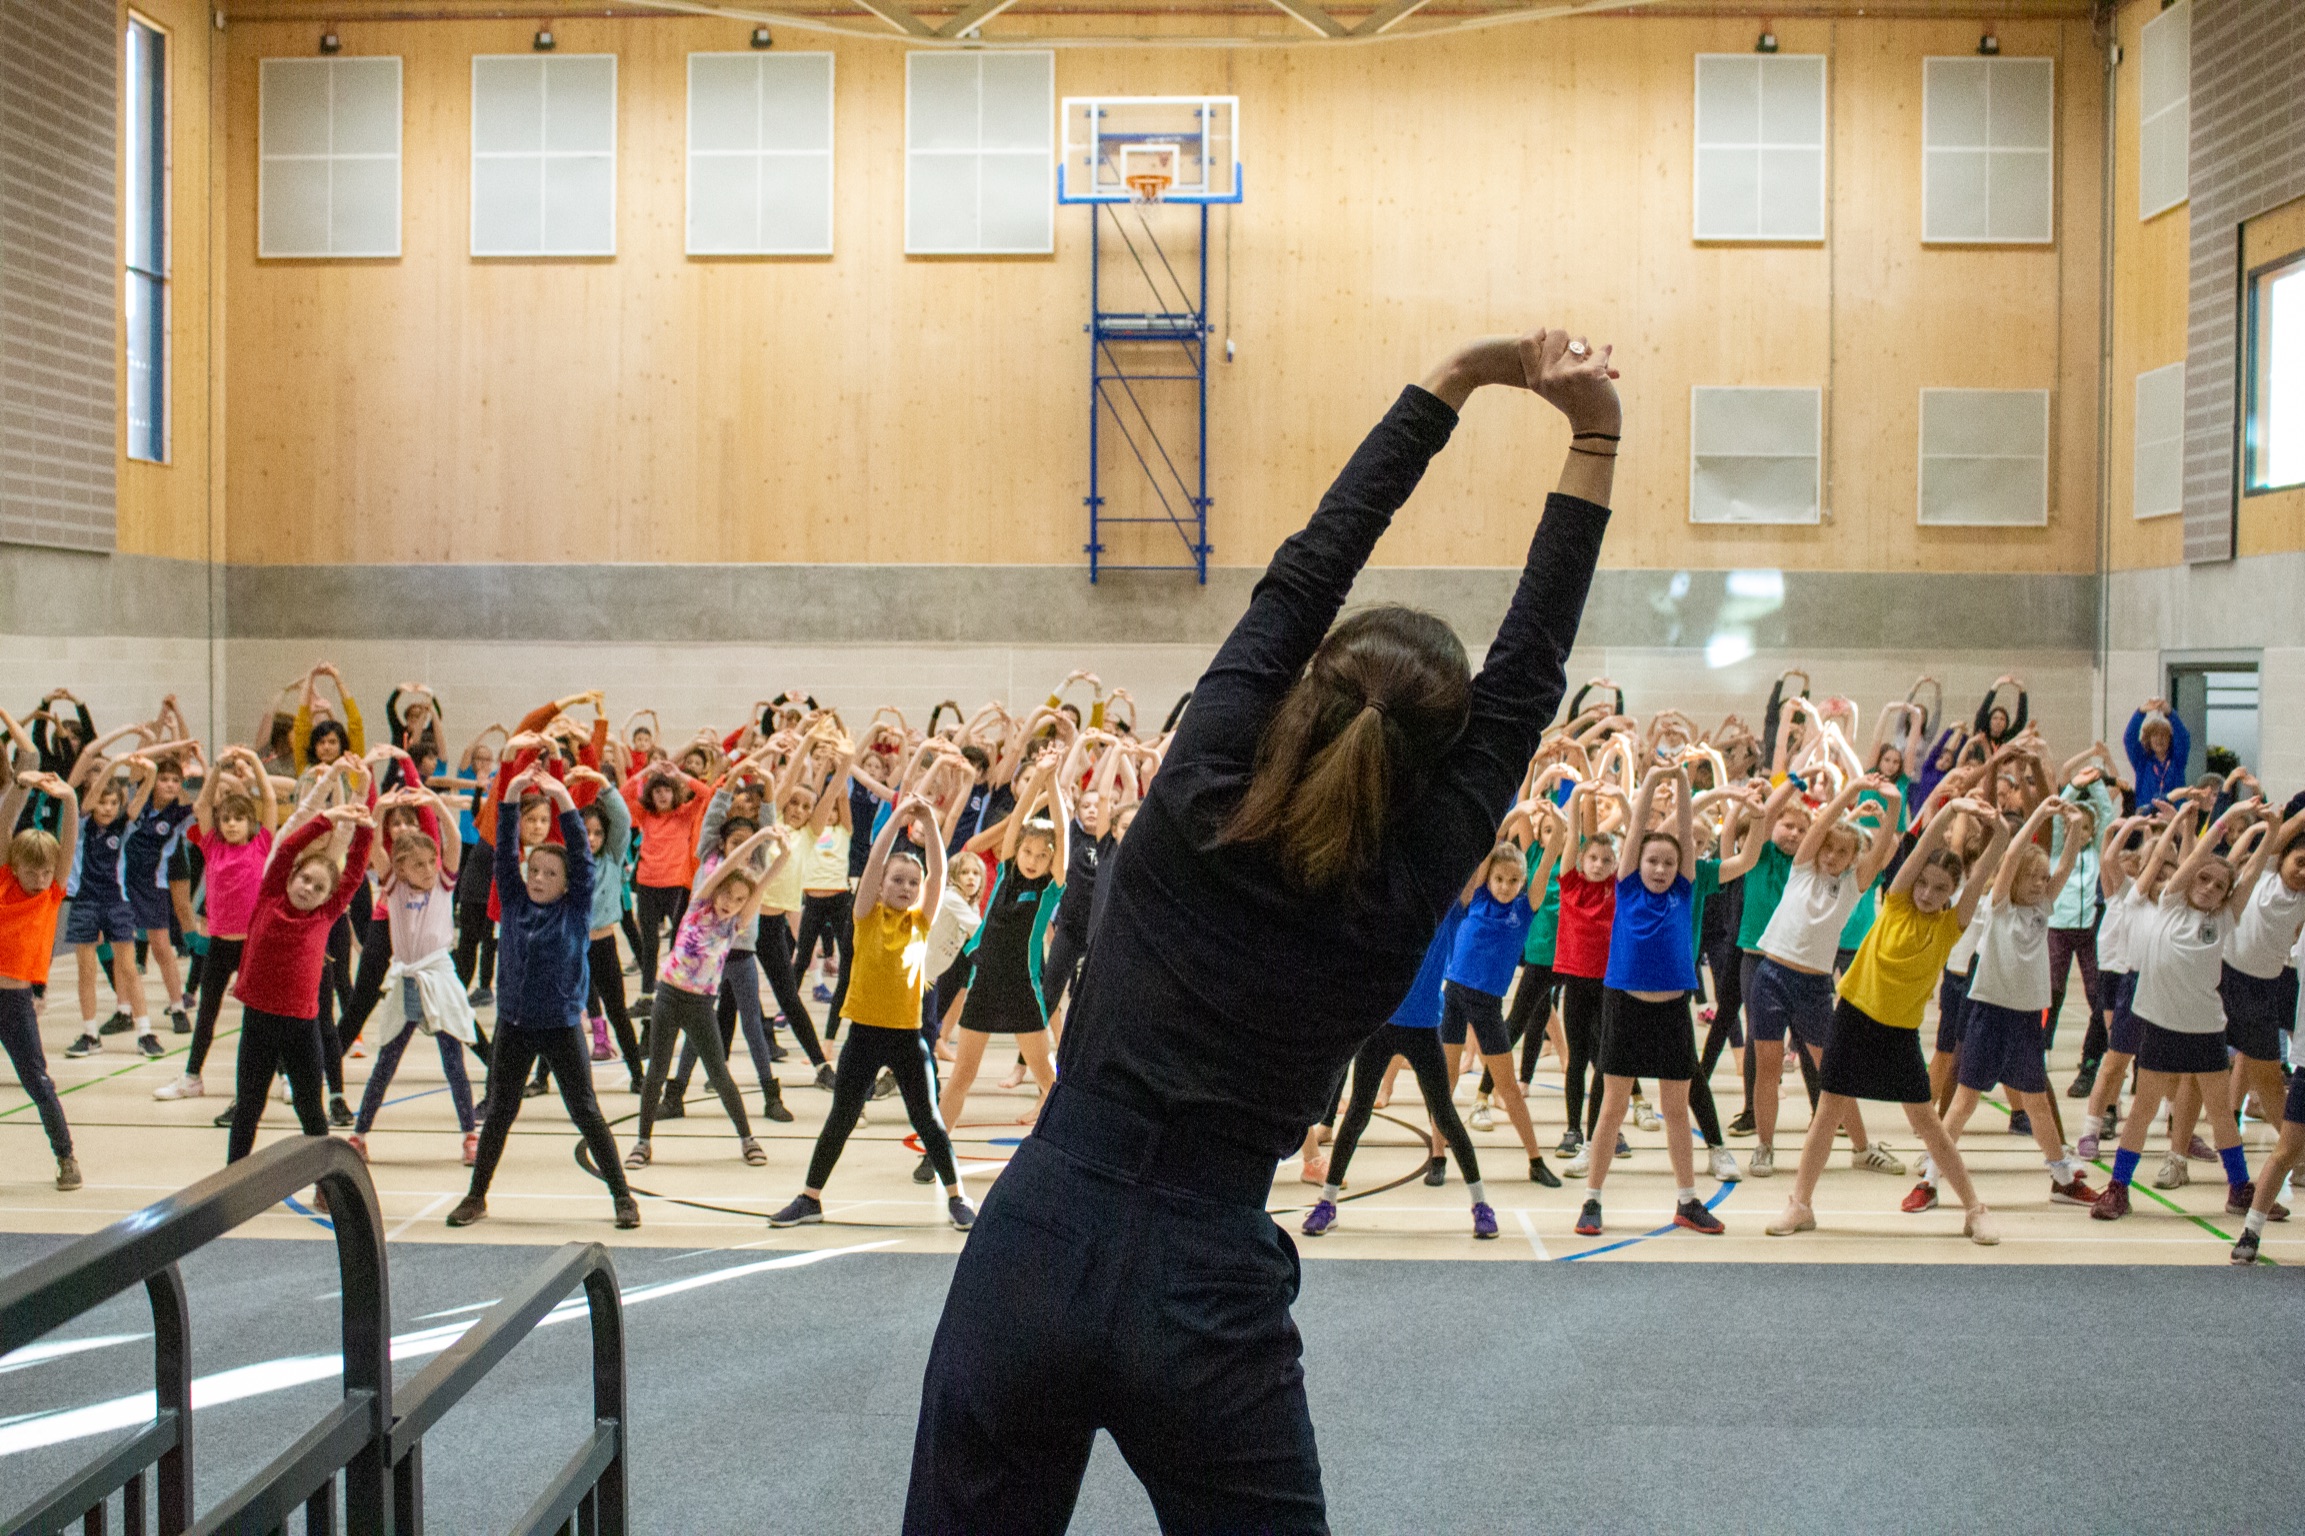 Innovate My School - Using dance fitness to improve student wellbeing